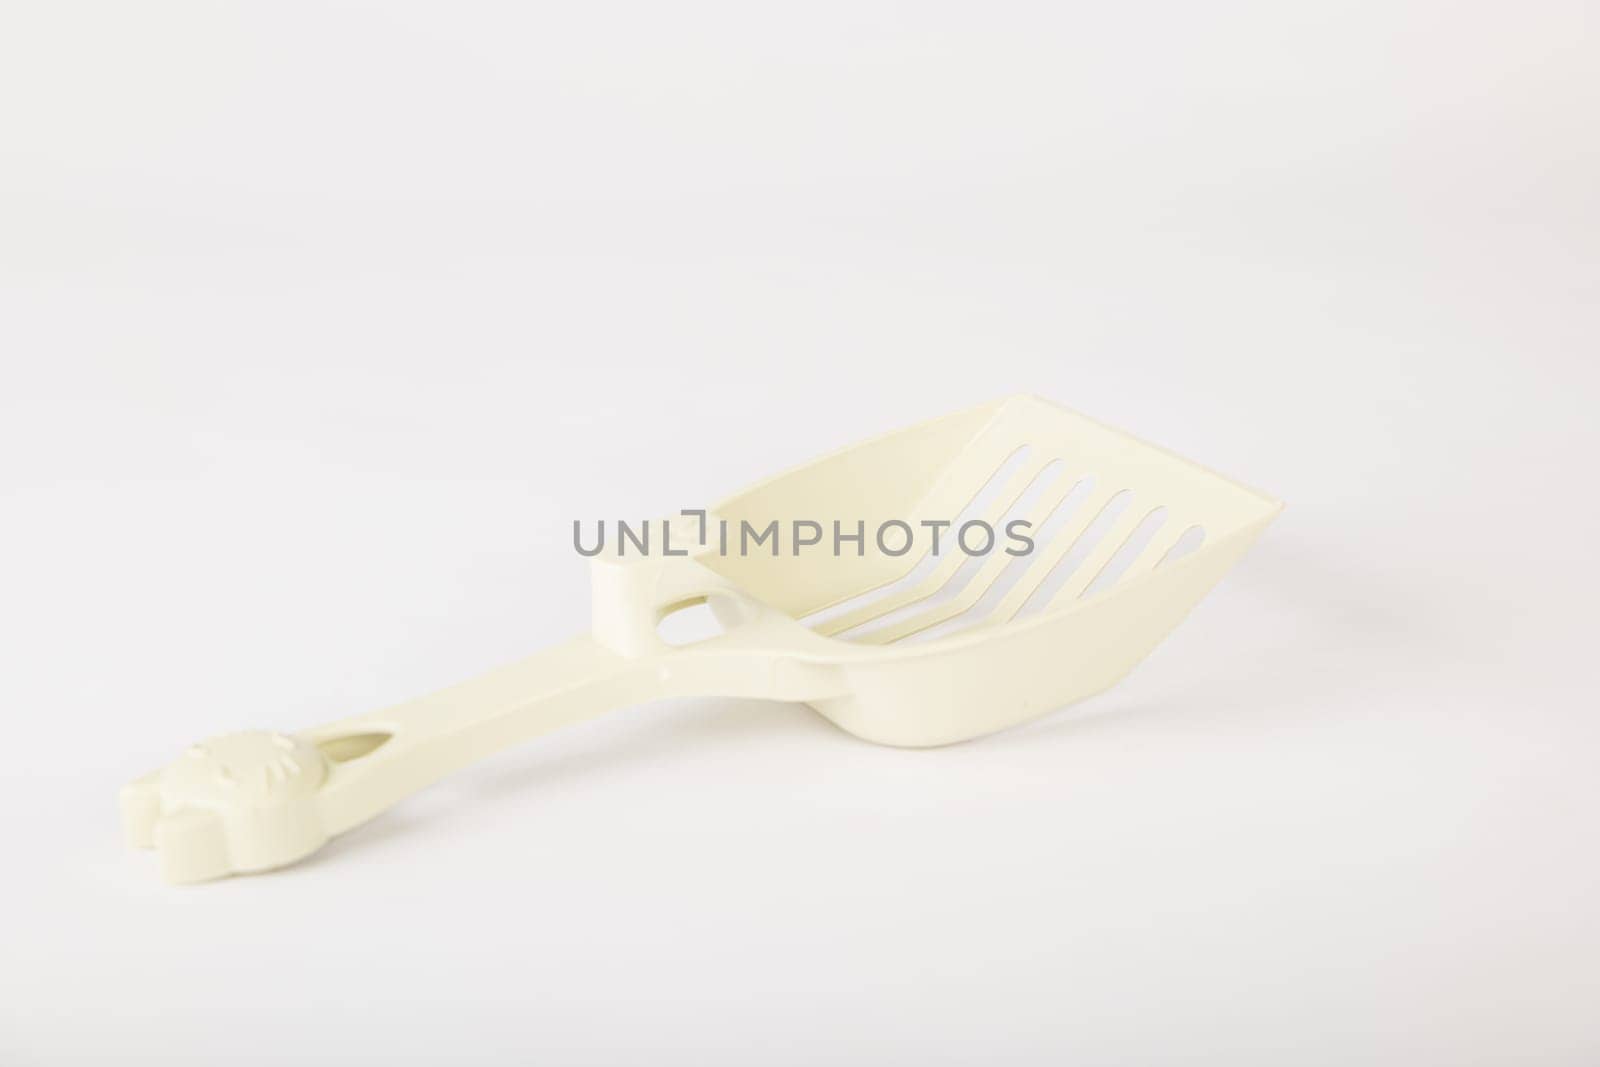 Isolated on a white background metal cat litter scoops are a must for maintaining hygiene and cleanliness in your cat's litter box. Purity and care in one simple tool.